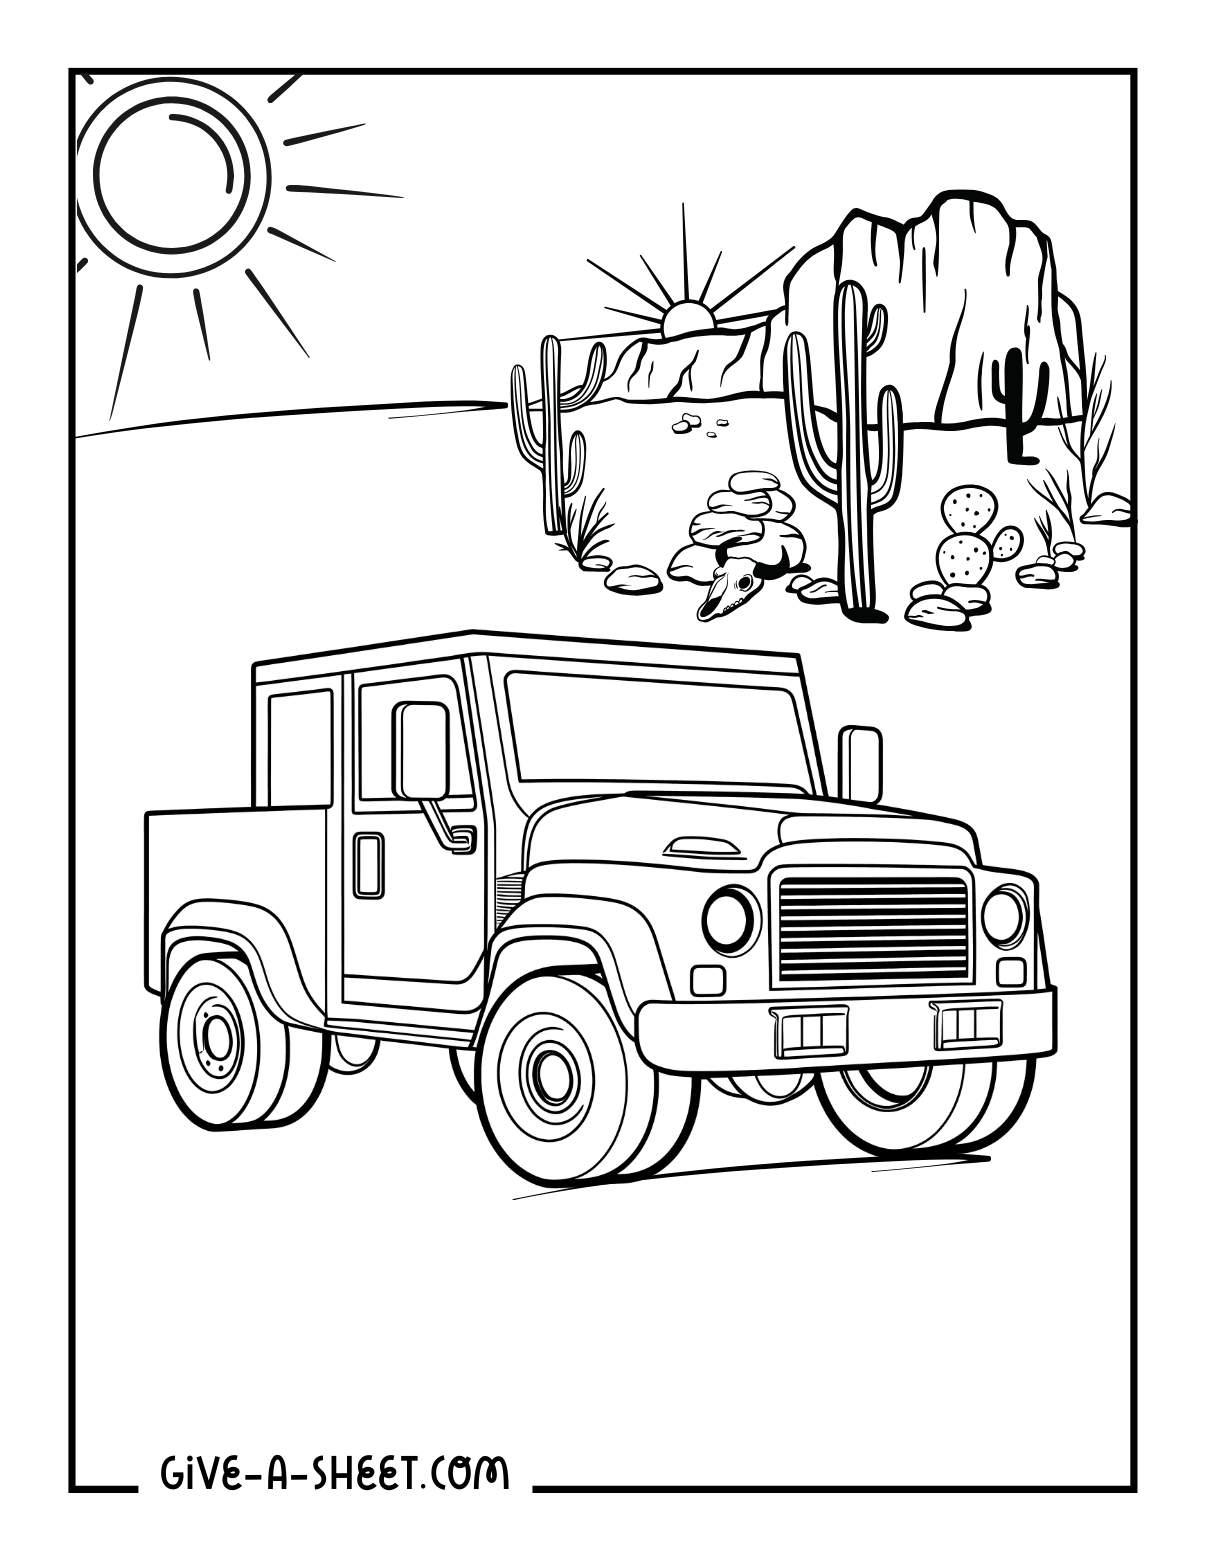 Four wheel drive truck coloring page.